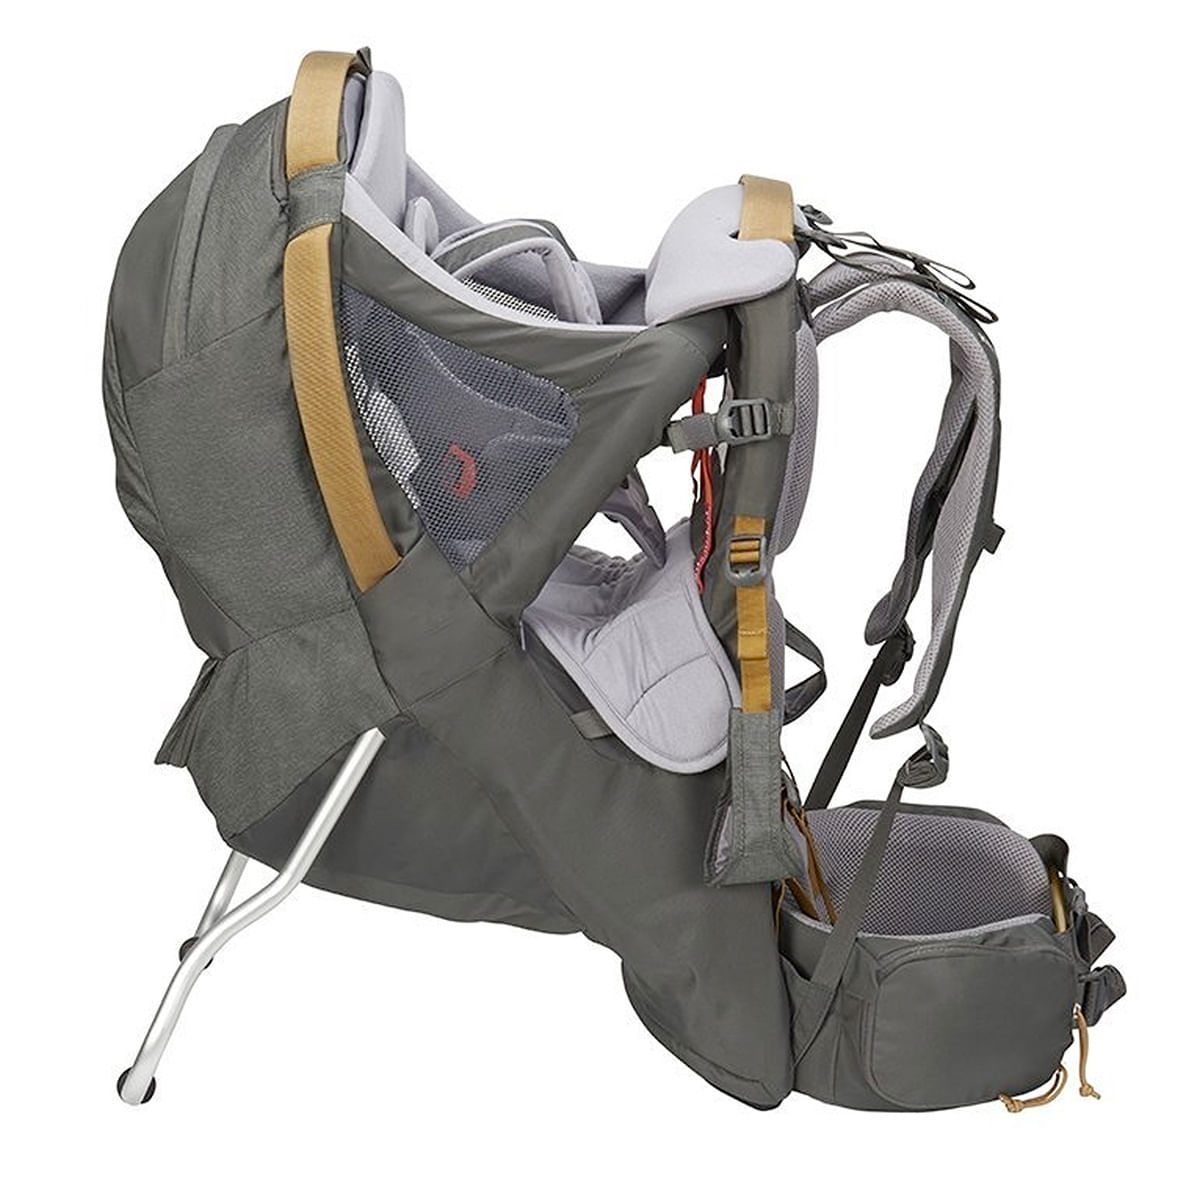 kelty journey perfectfit weight limit